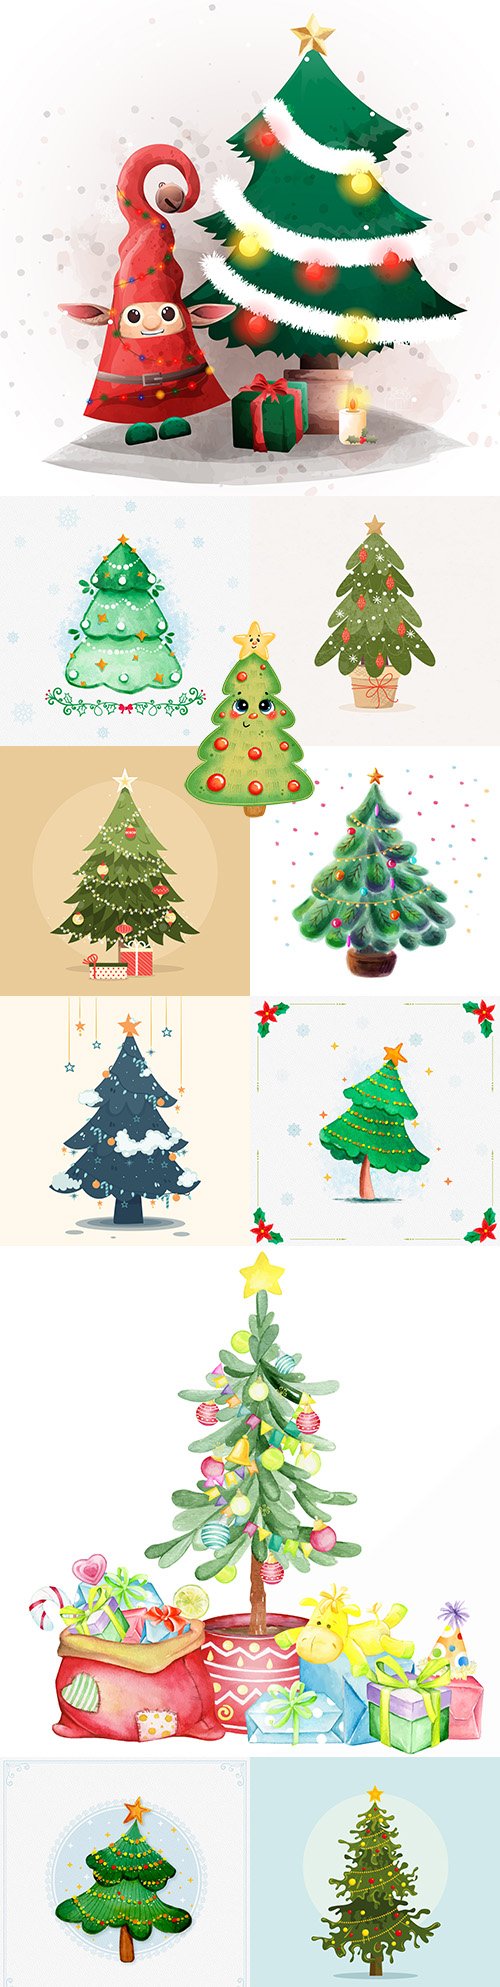 Christmas tree with gifts and toys illustrations